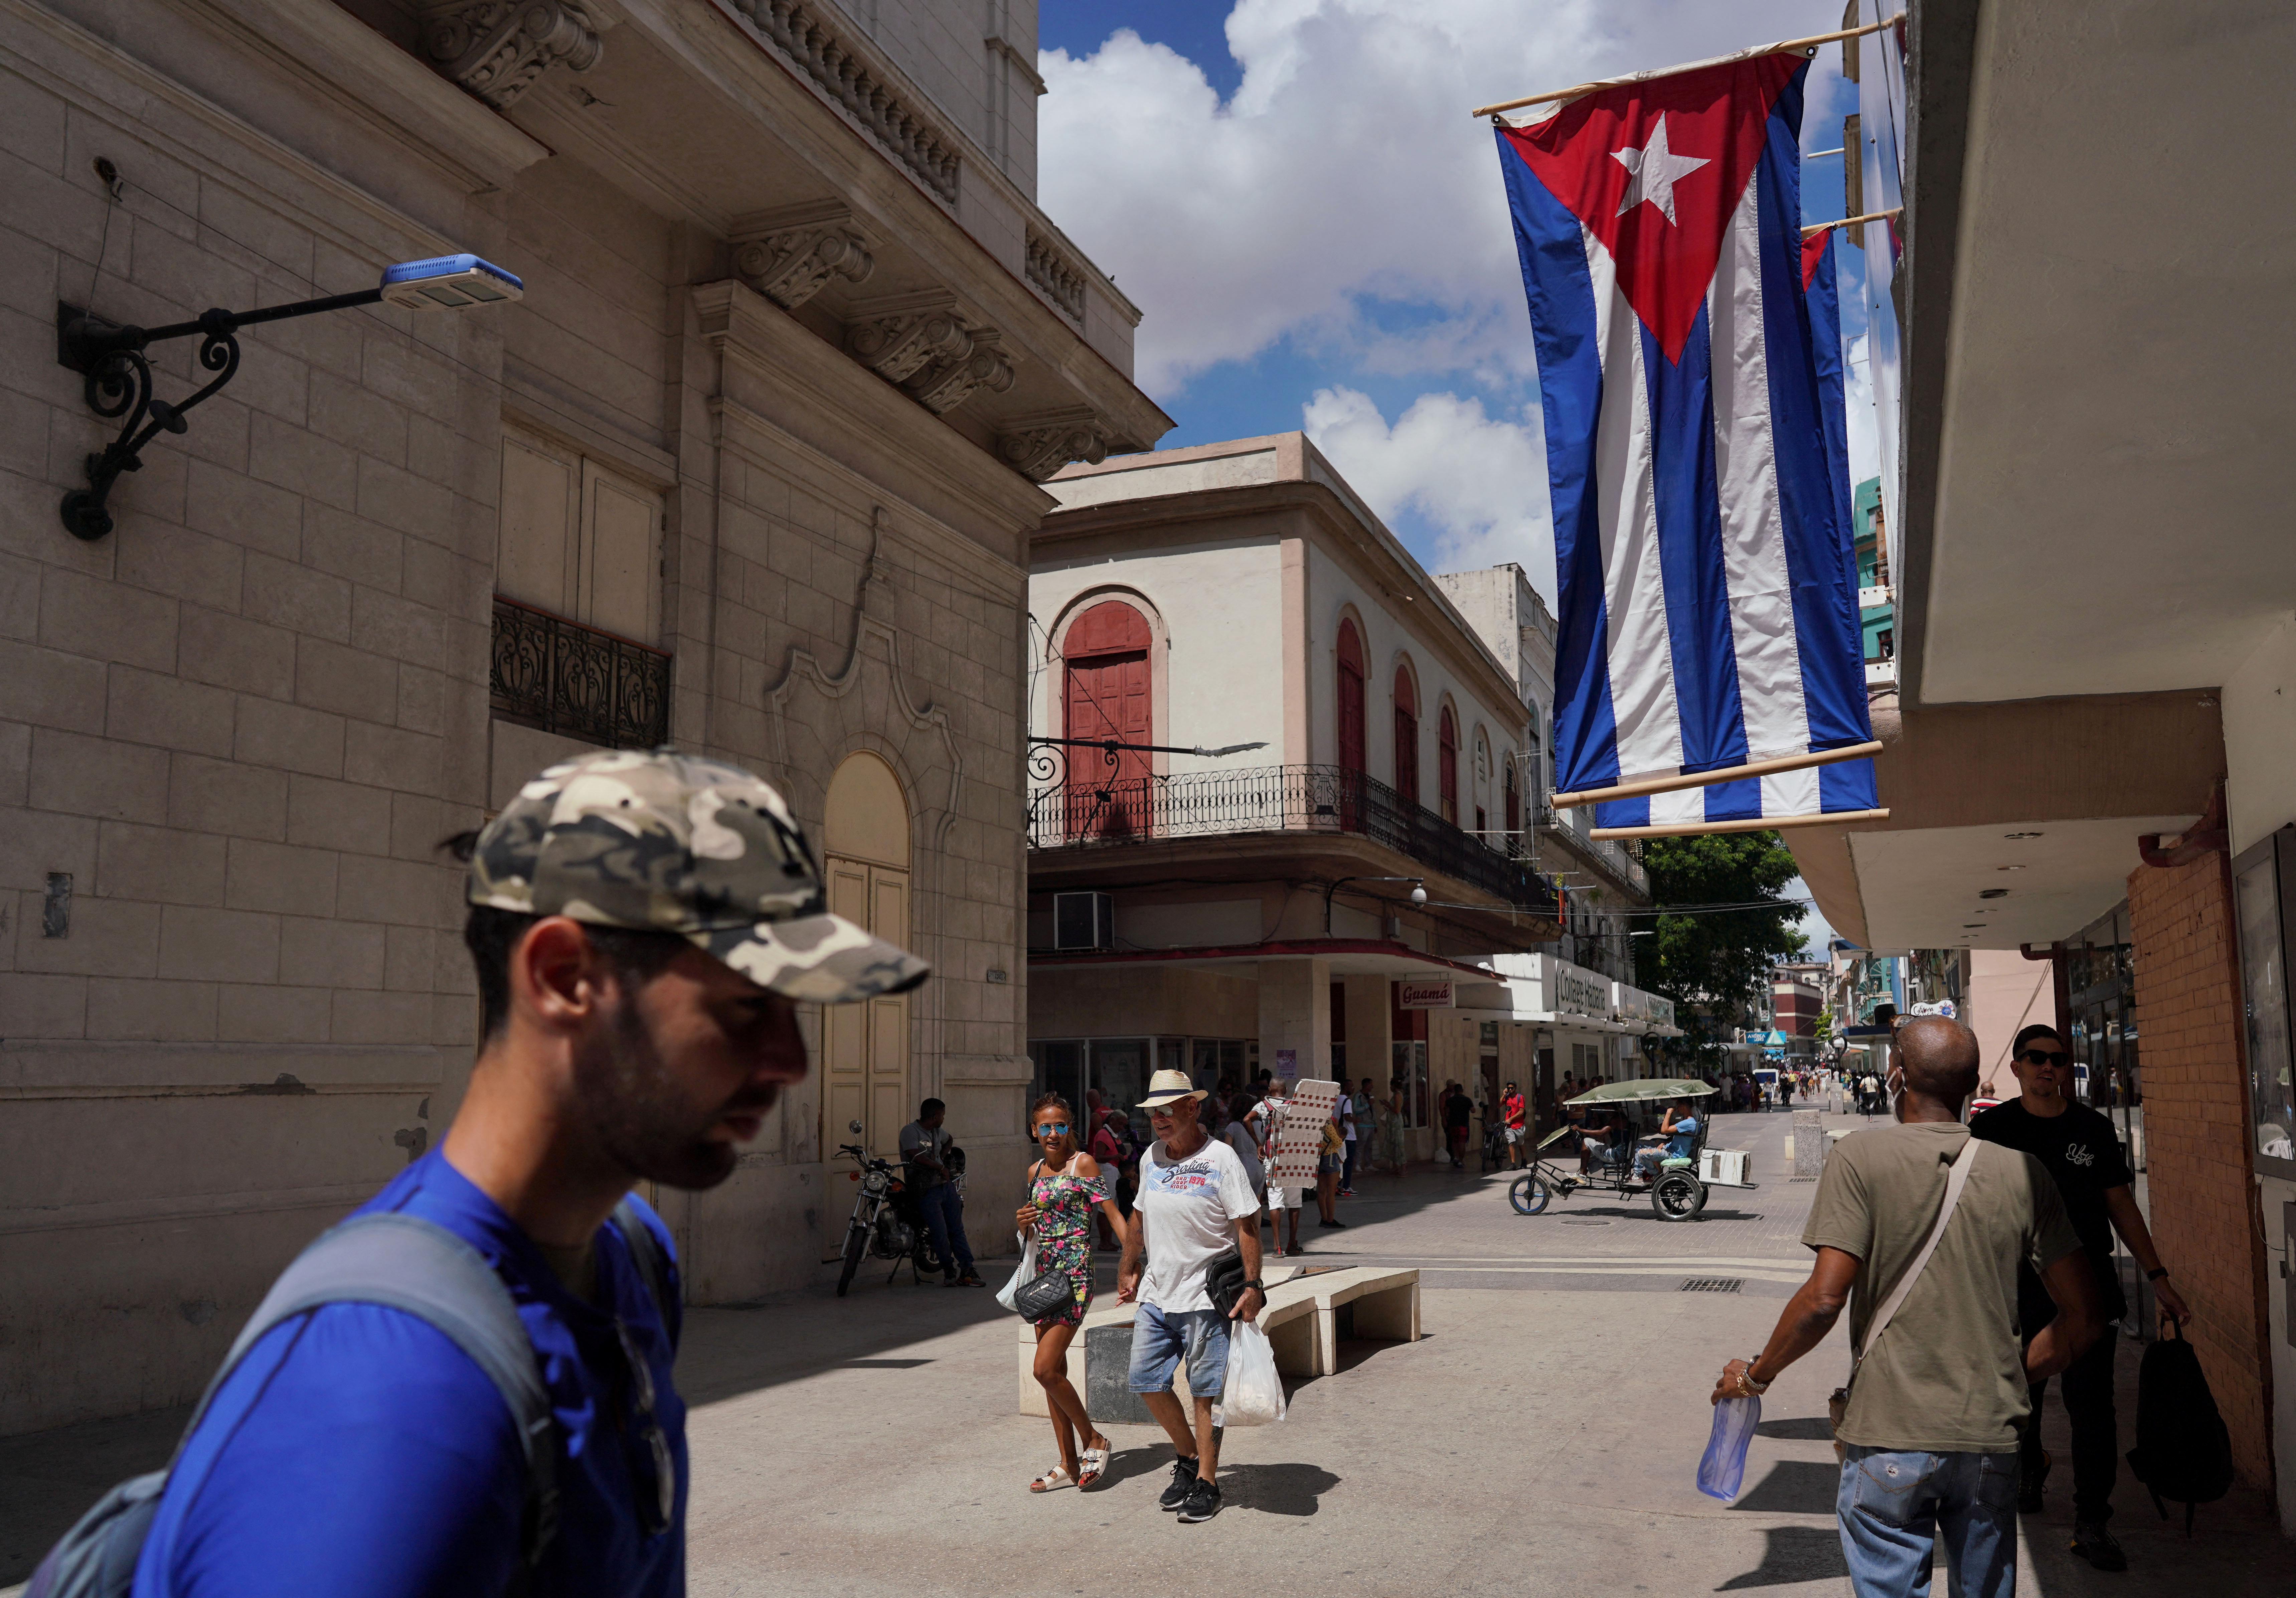 Cuban flags are displayed at a commercial road in Havana